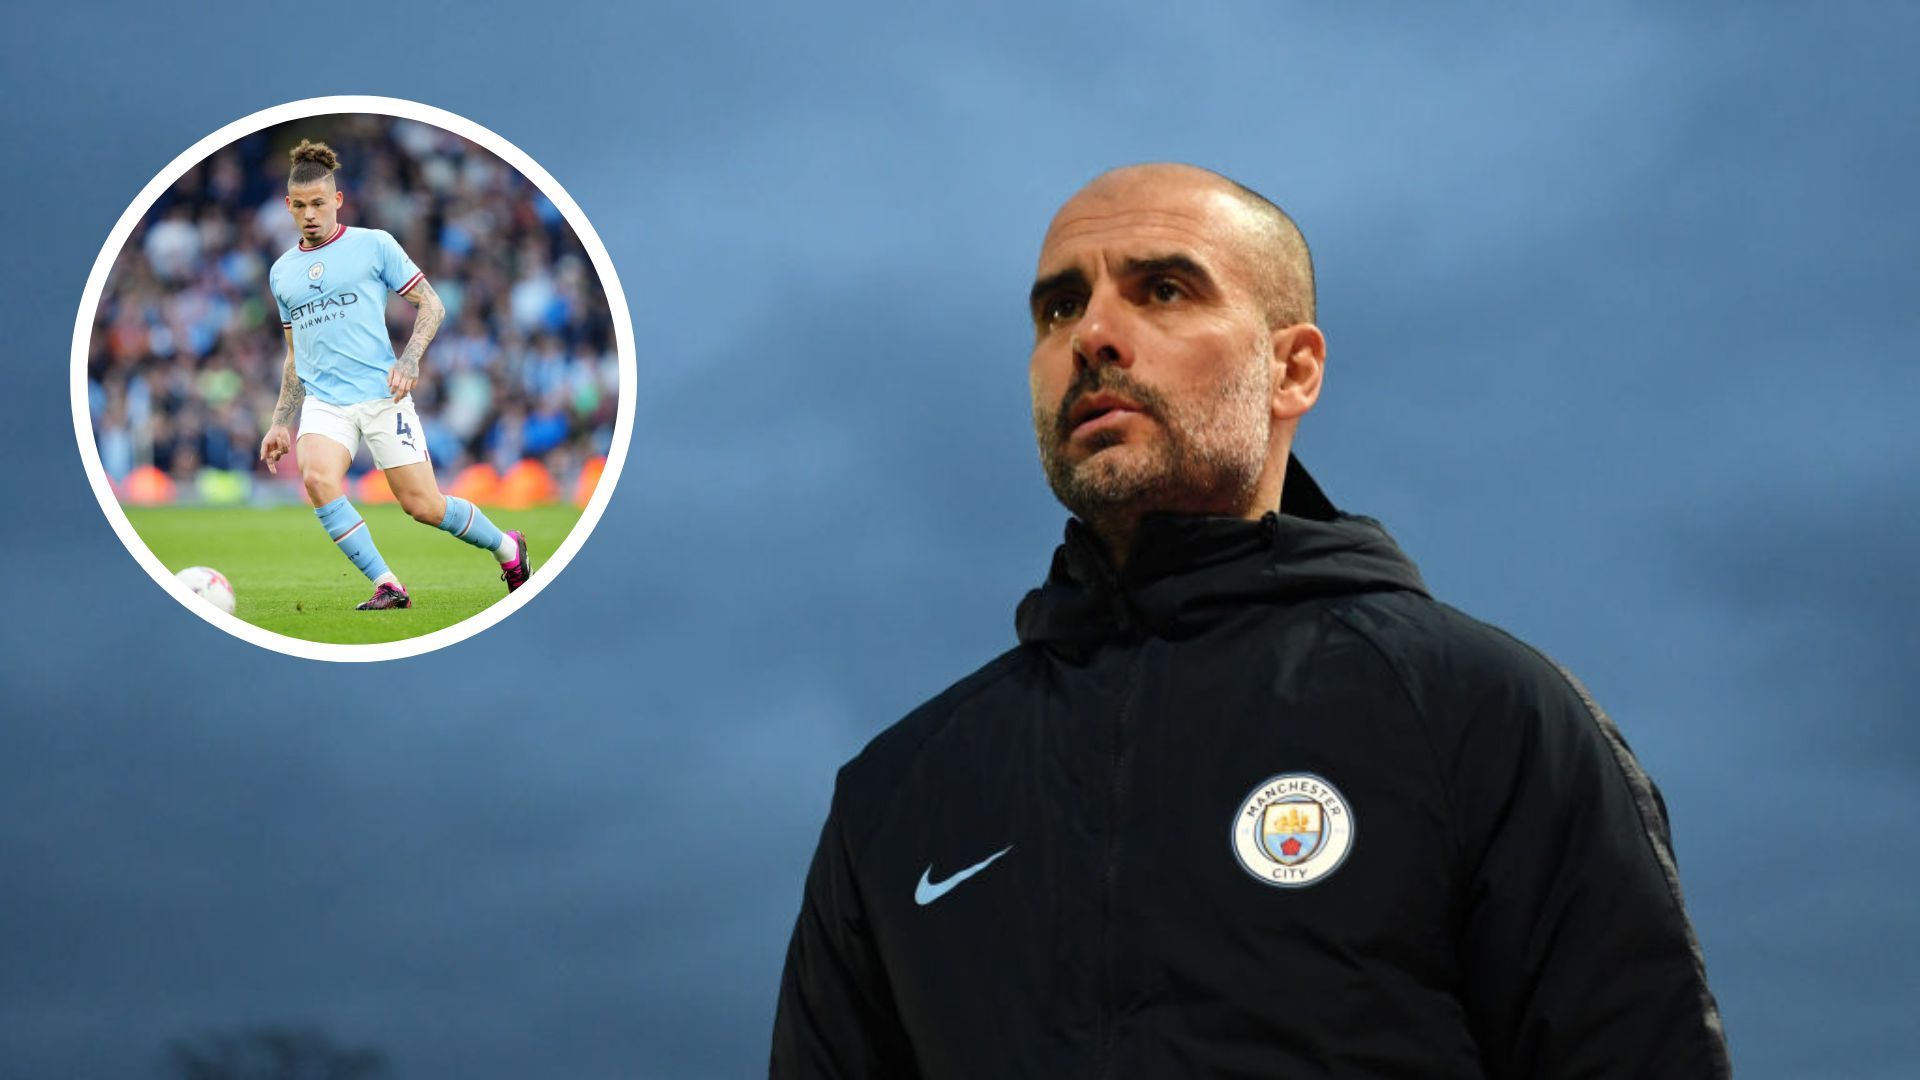 Manchester City star says Pep Guardiola comments were 'hard to take'